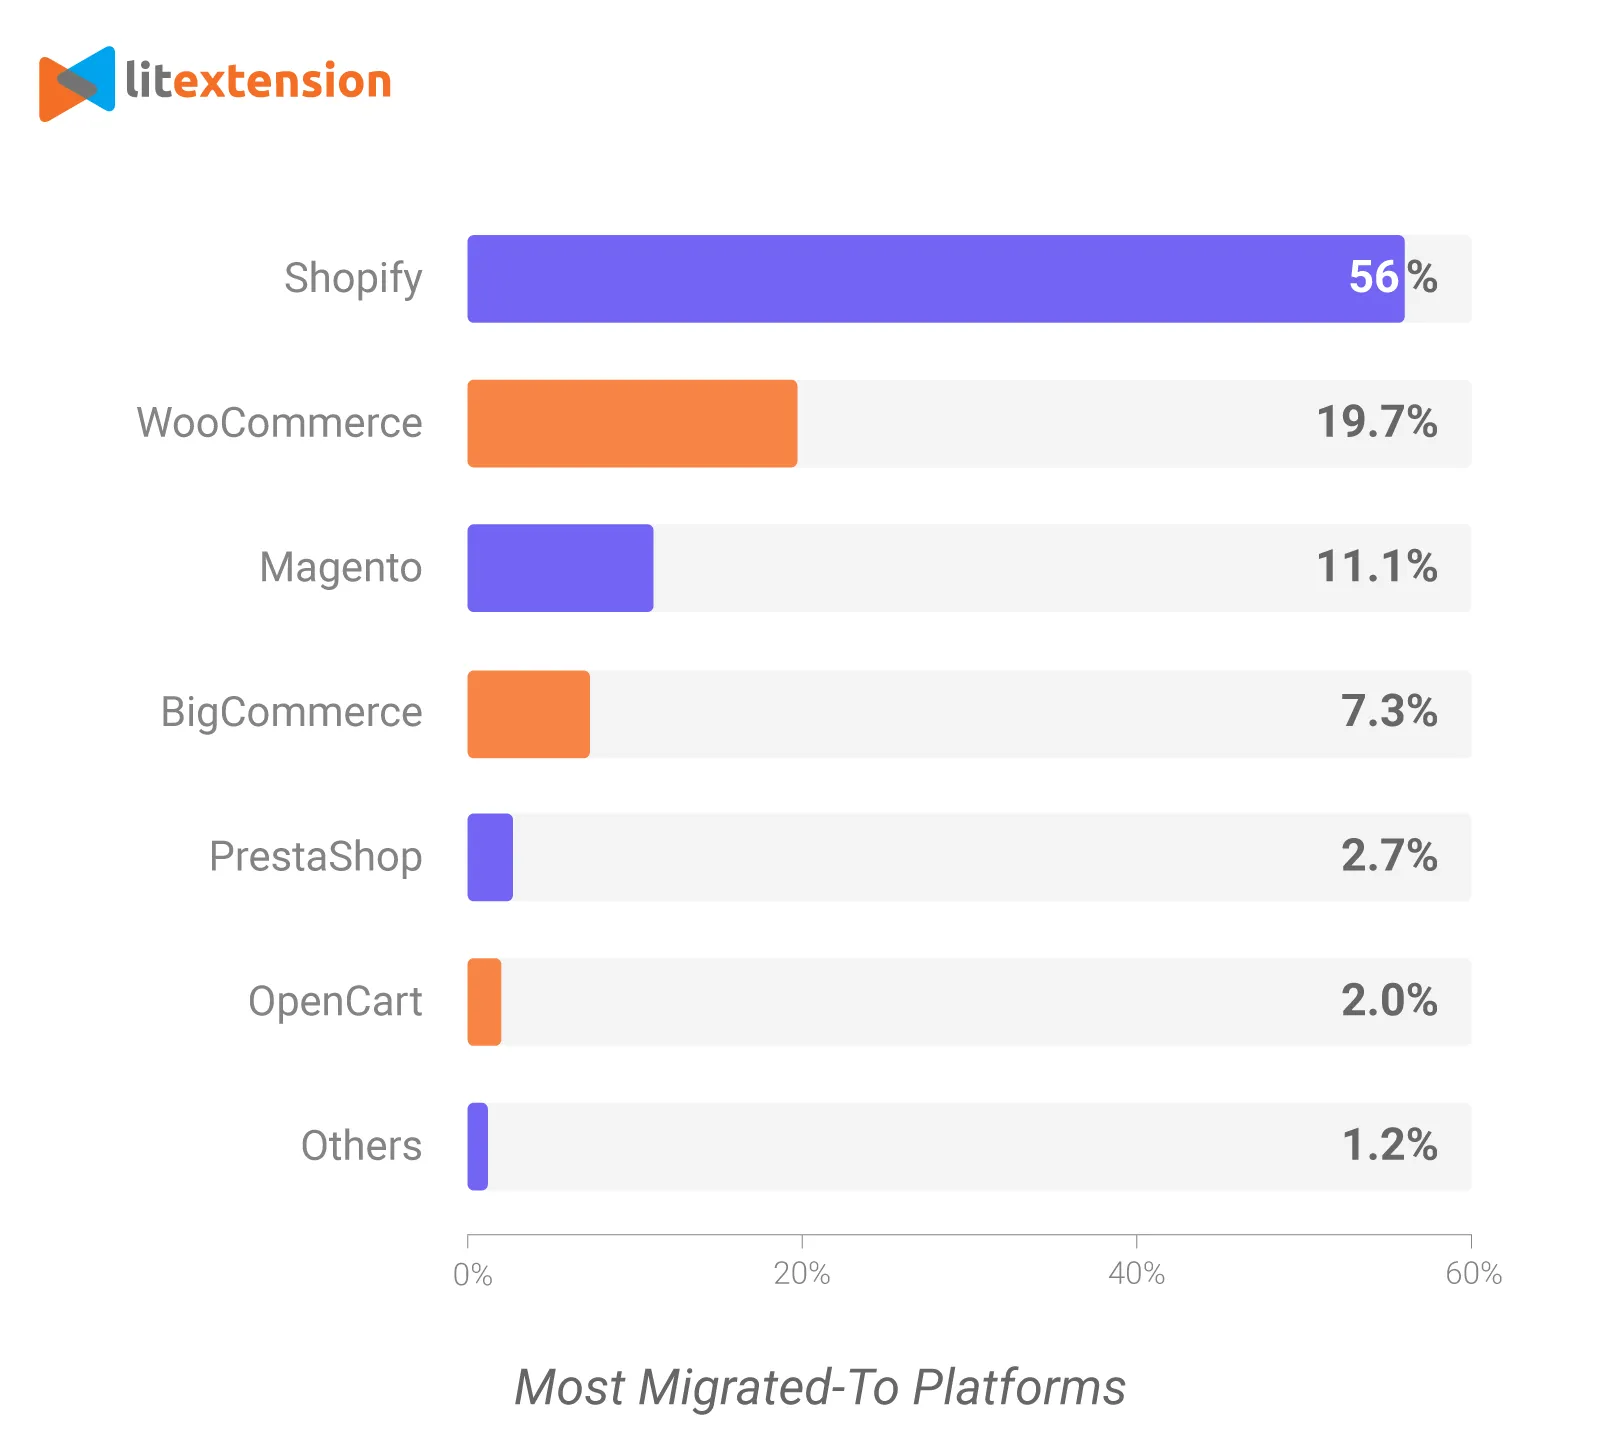 Most migrated-to platforms